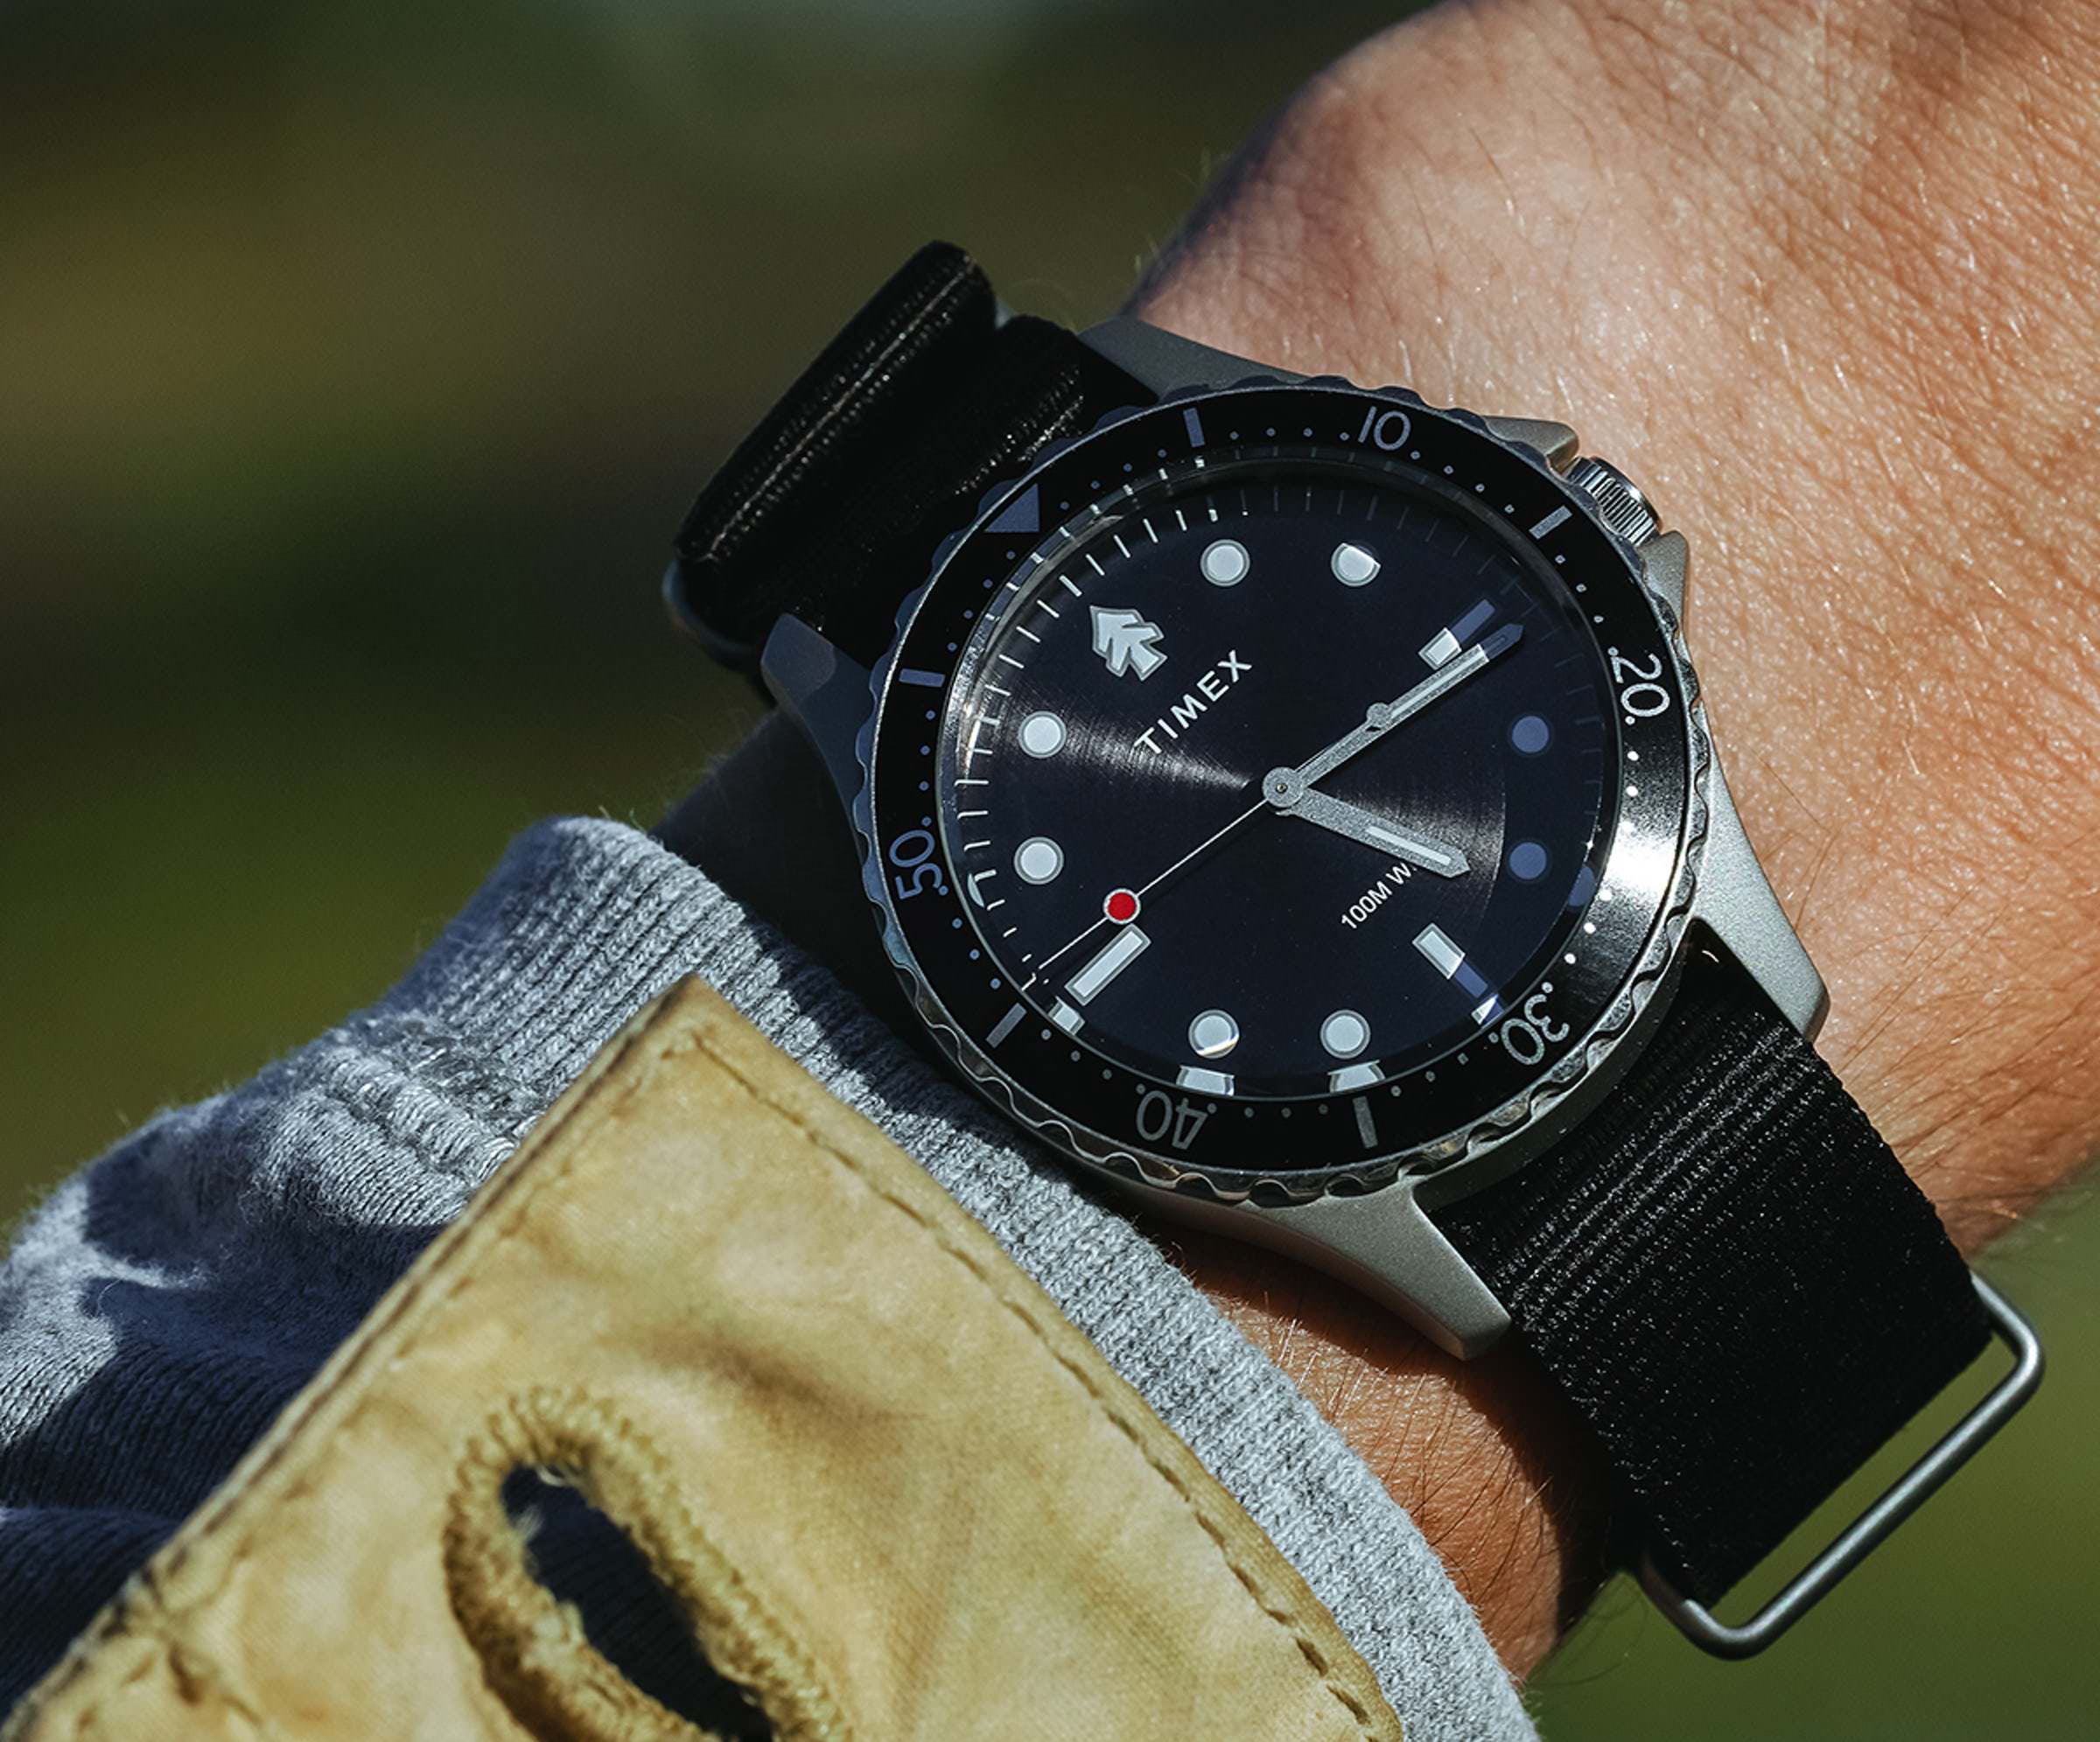 Huckberry X Timex Diver - A Classically-Styled Dive Watch For $118 USD